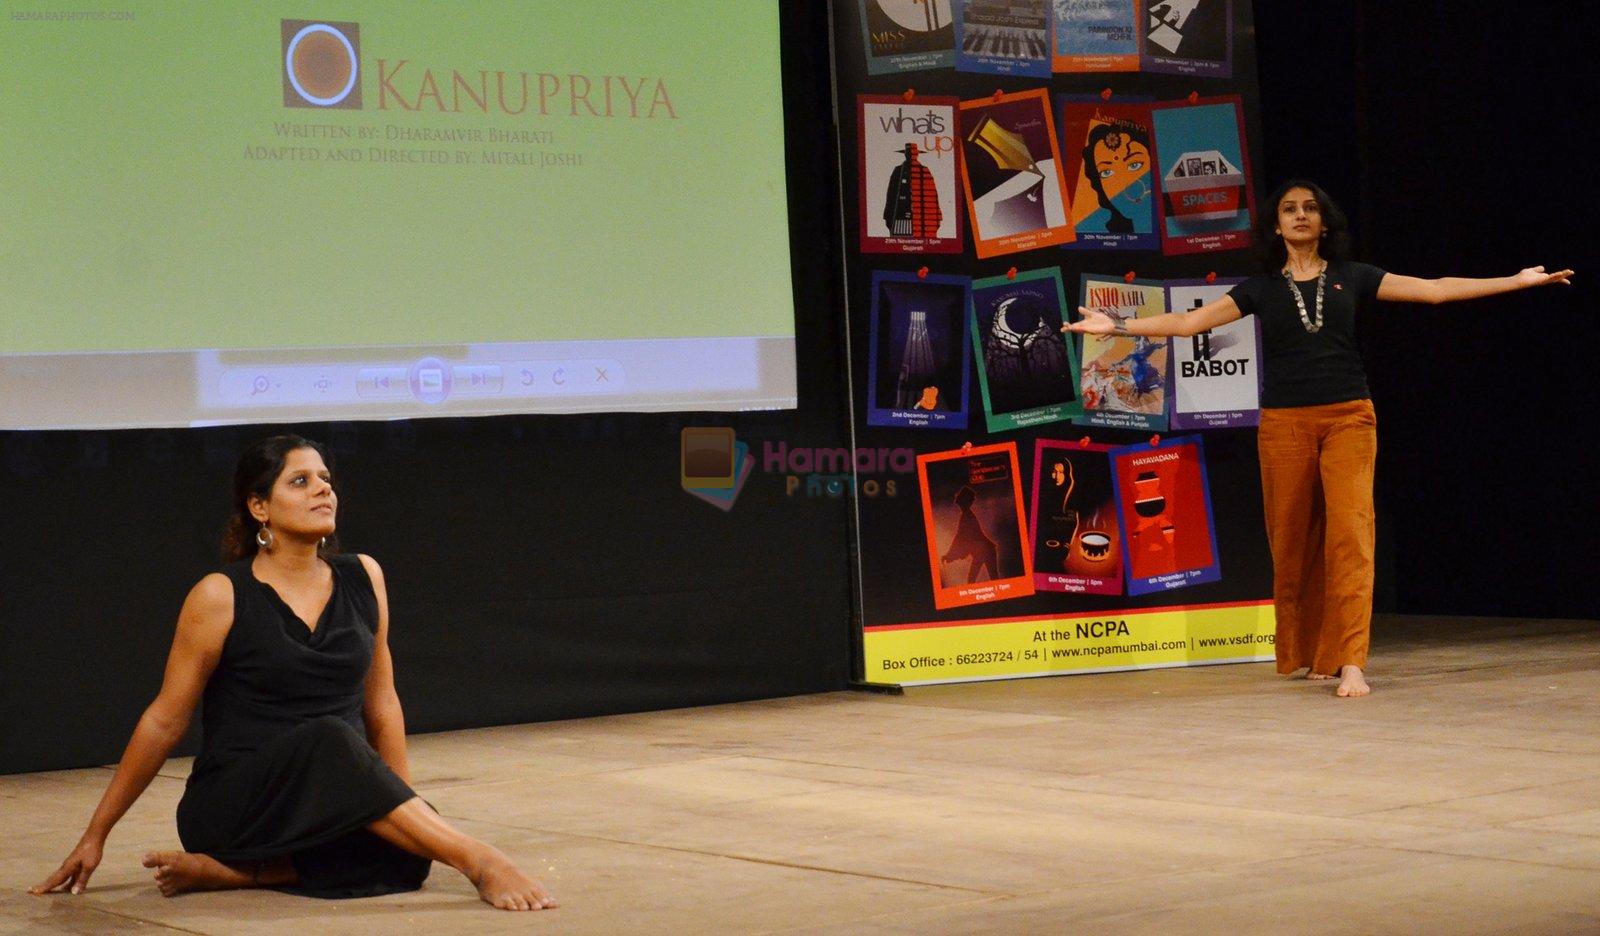 at Centre stage opening on 18th Nov 2015